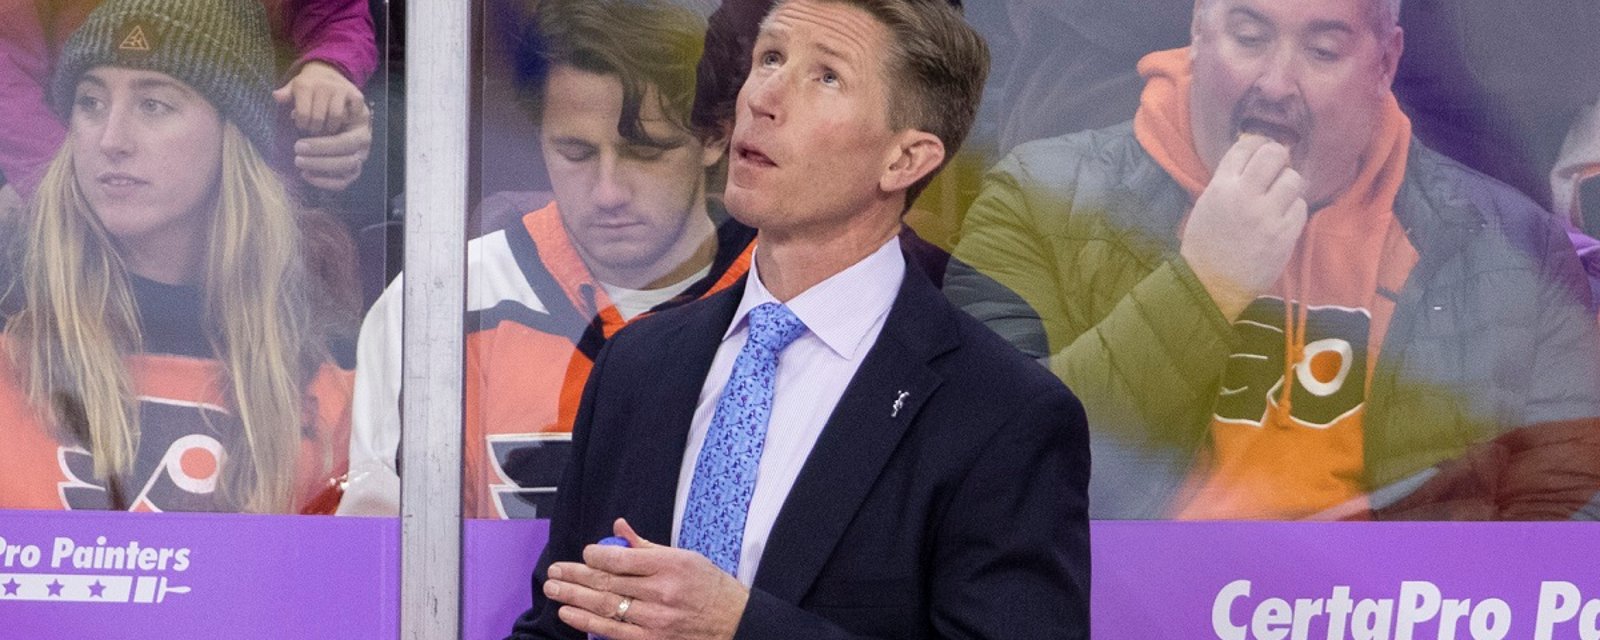 Breaking: Former Flyers head coach Dave Hakstol joins a rival NHL team.